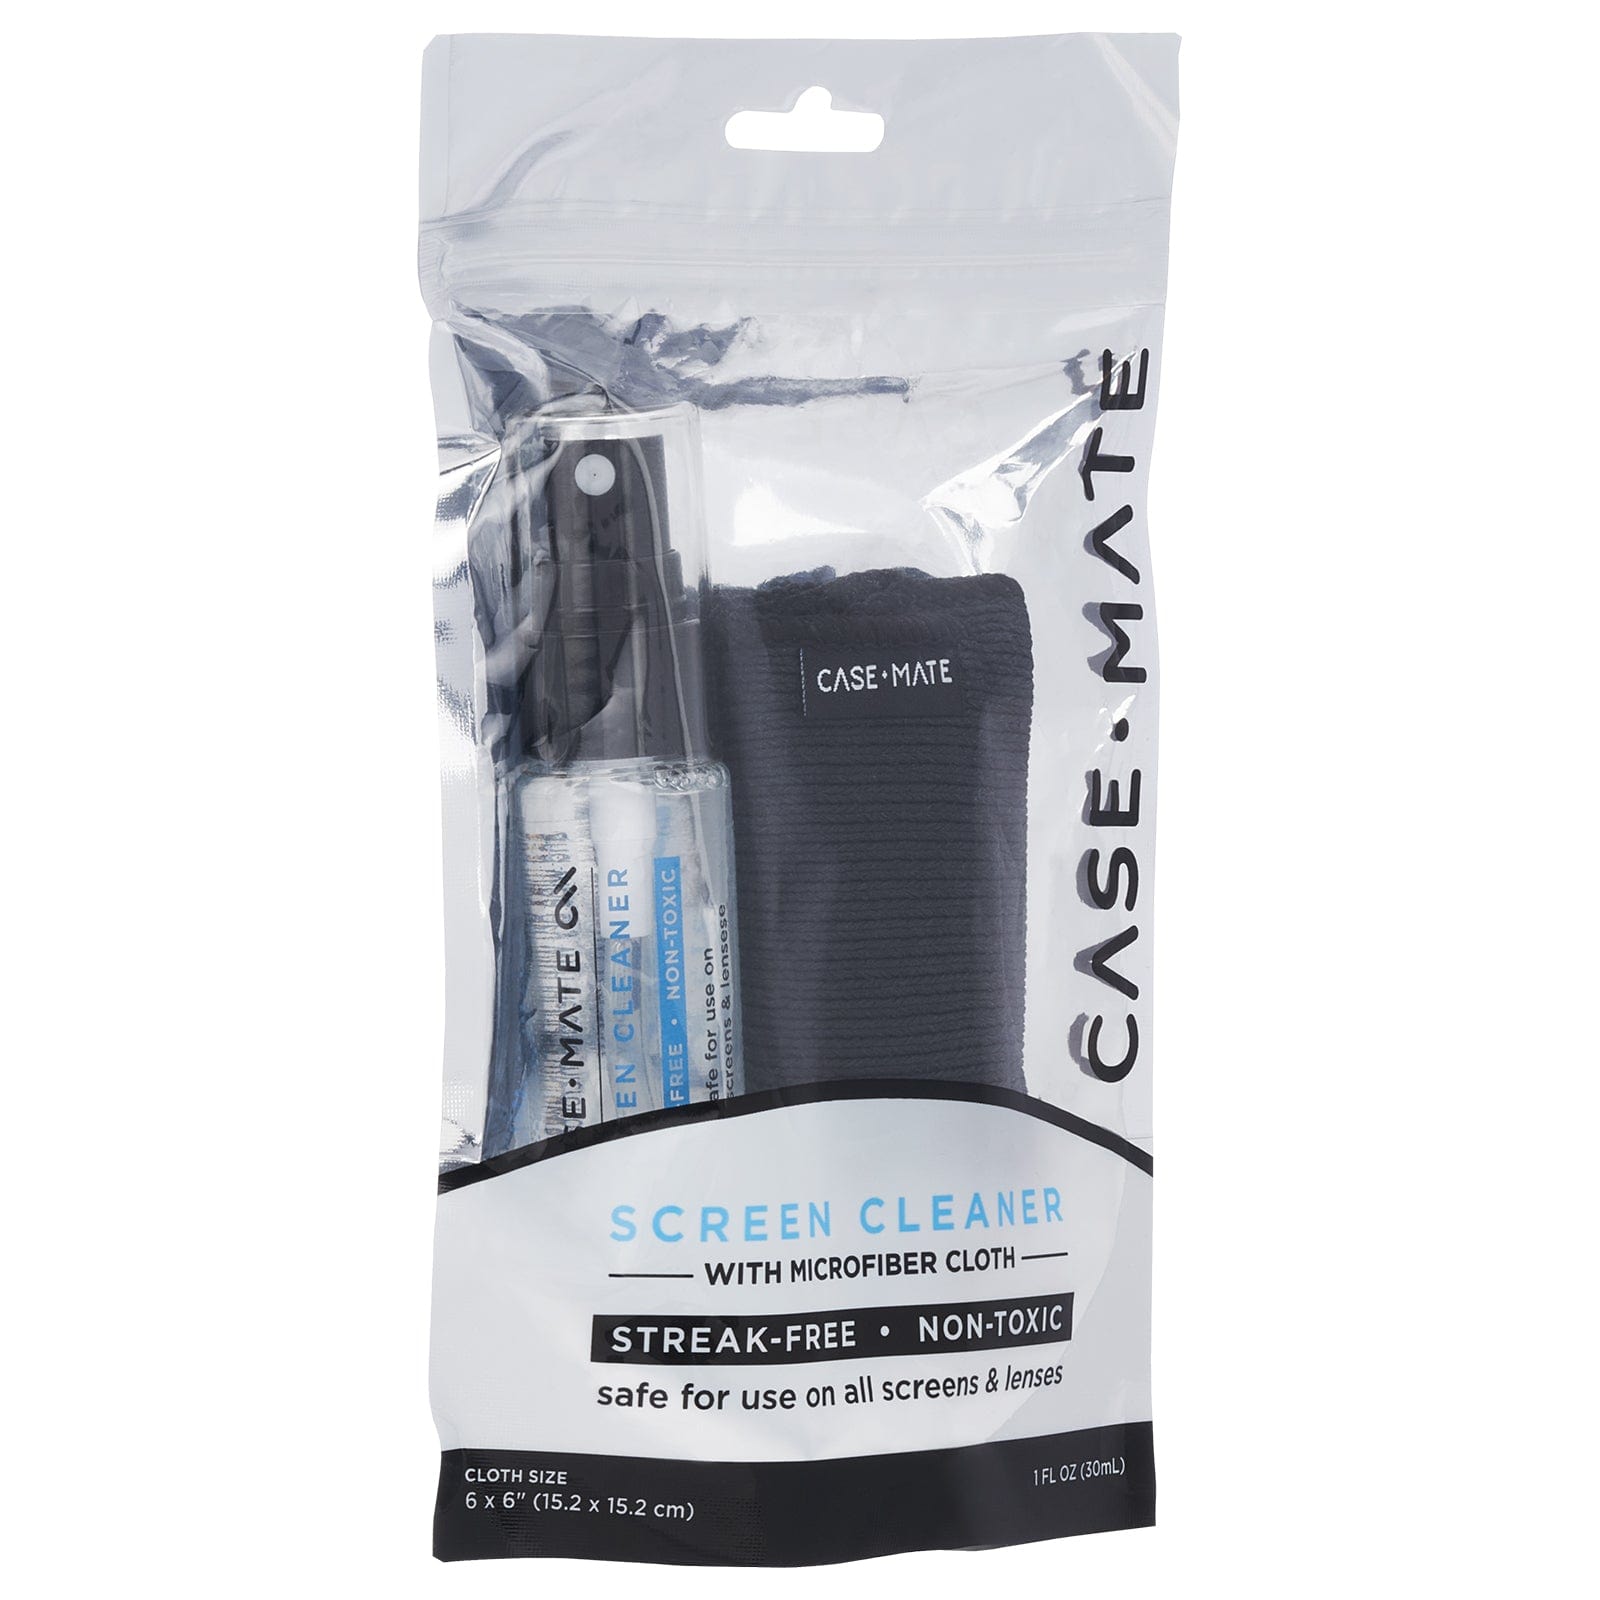 Case-Mate Device Cleaning Kit